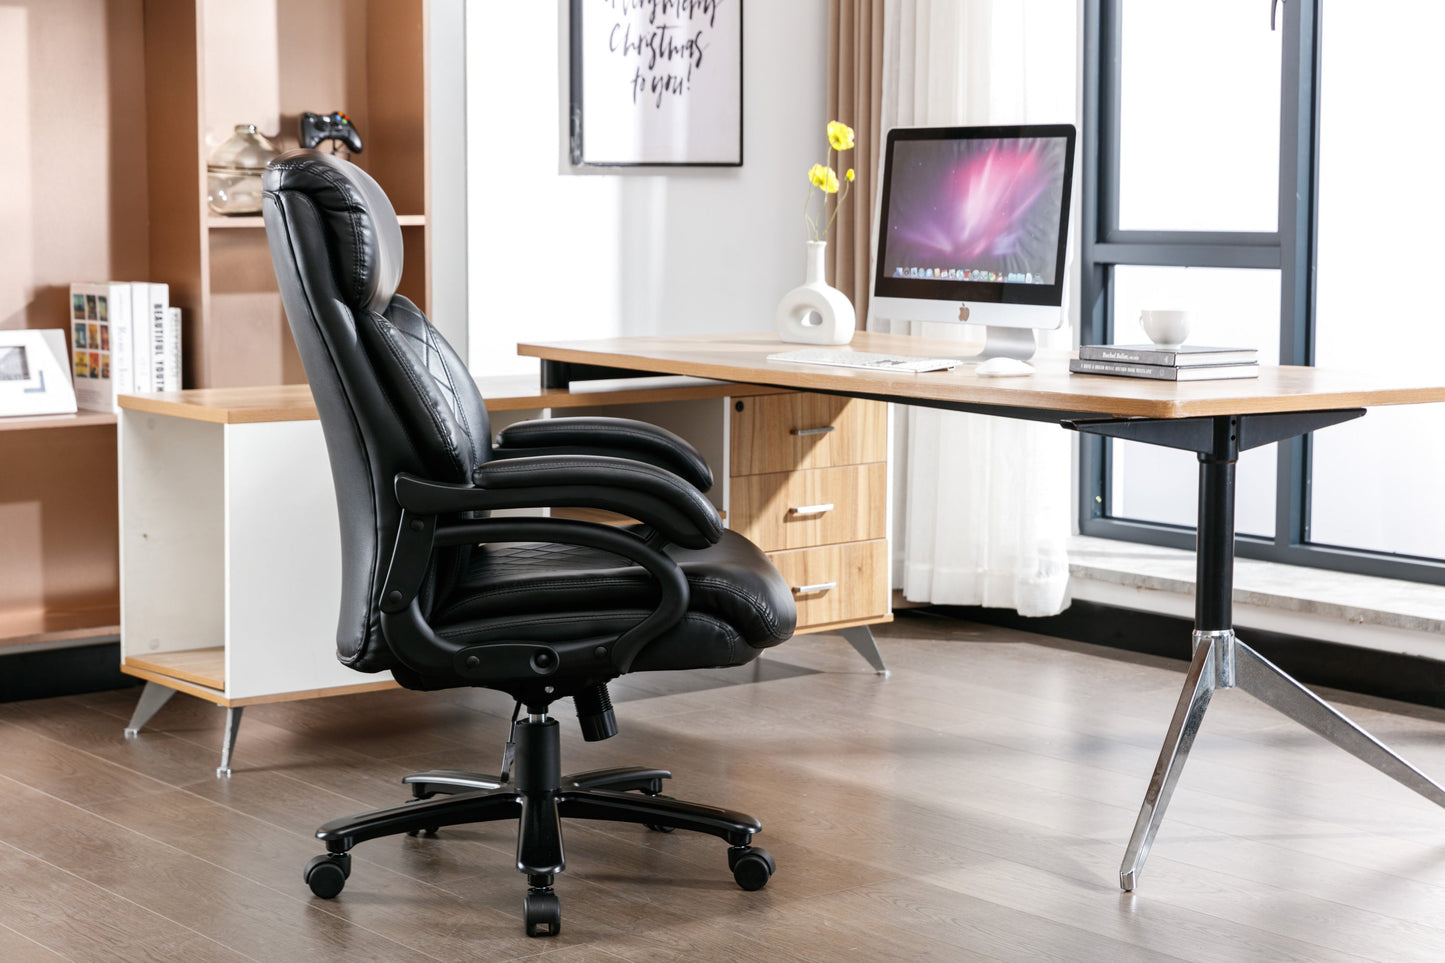 Office Desk Chair with High Quality PU Leather,Adjustable Height/Tilt,360-Degree